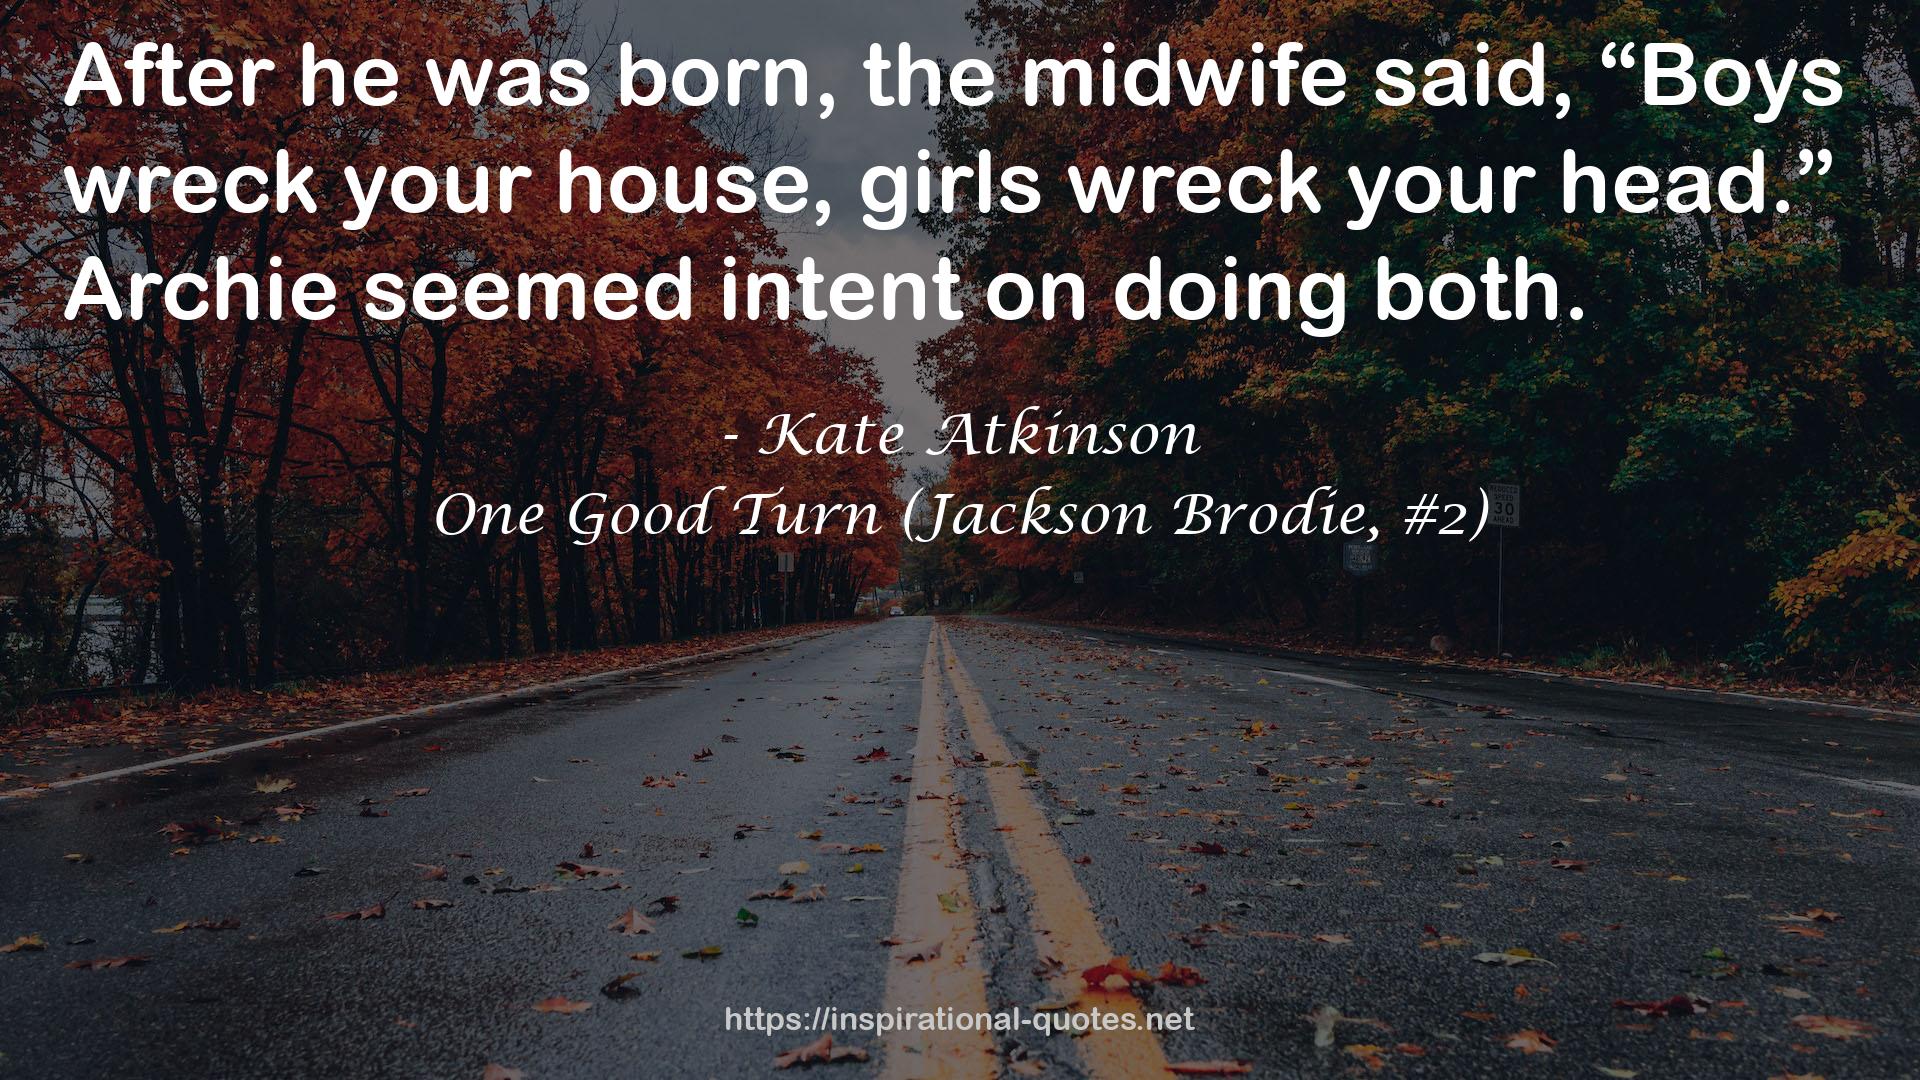 One Good Turn (Jackson Brodie, #2) QUOTES